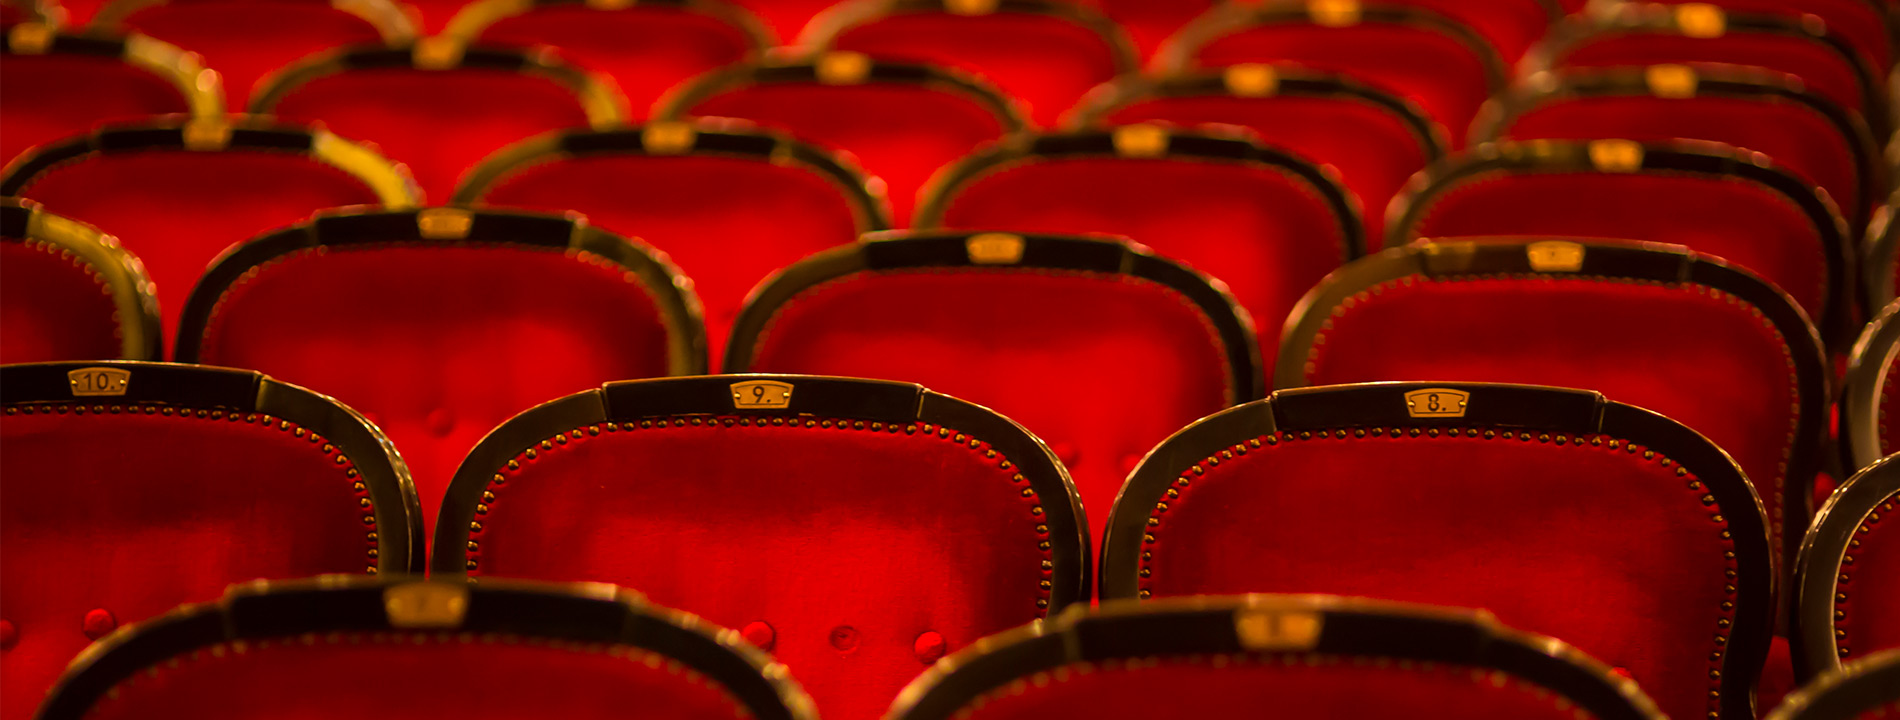 close up of red seats in theater